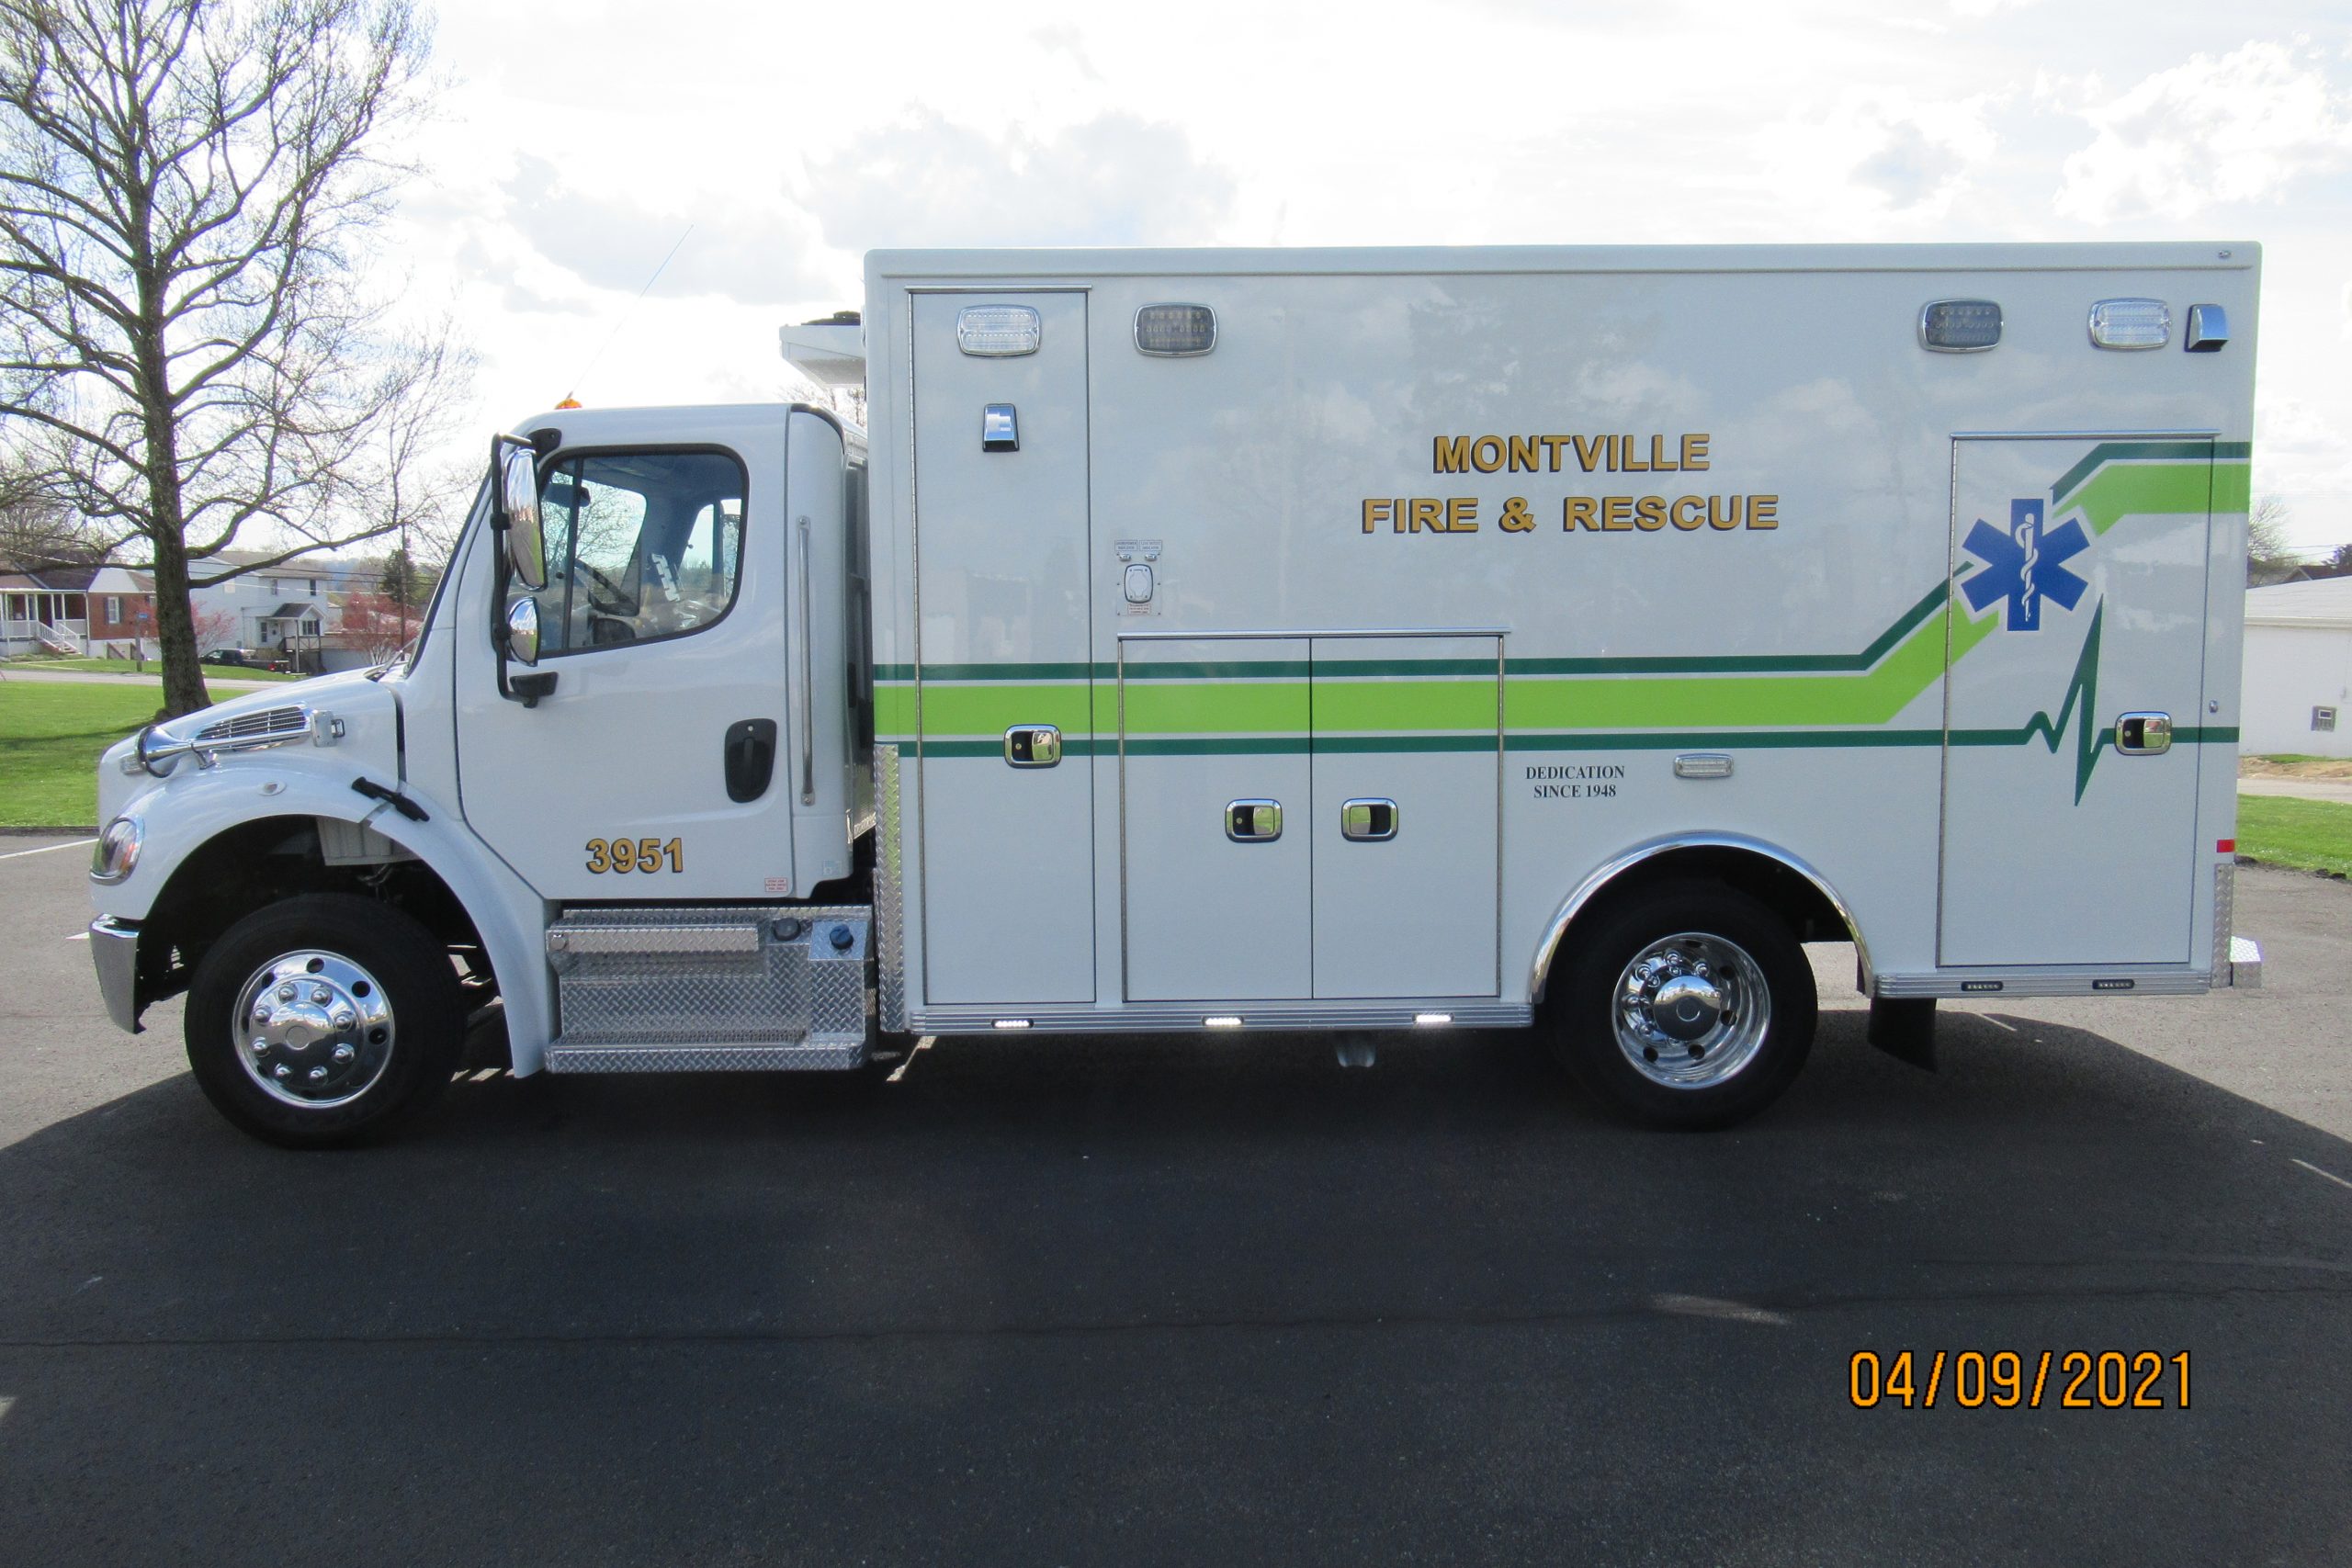 Montville Township Fire Department, Montville Ohio Geauga County. 2021